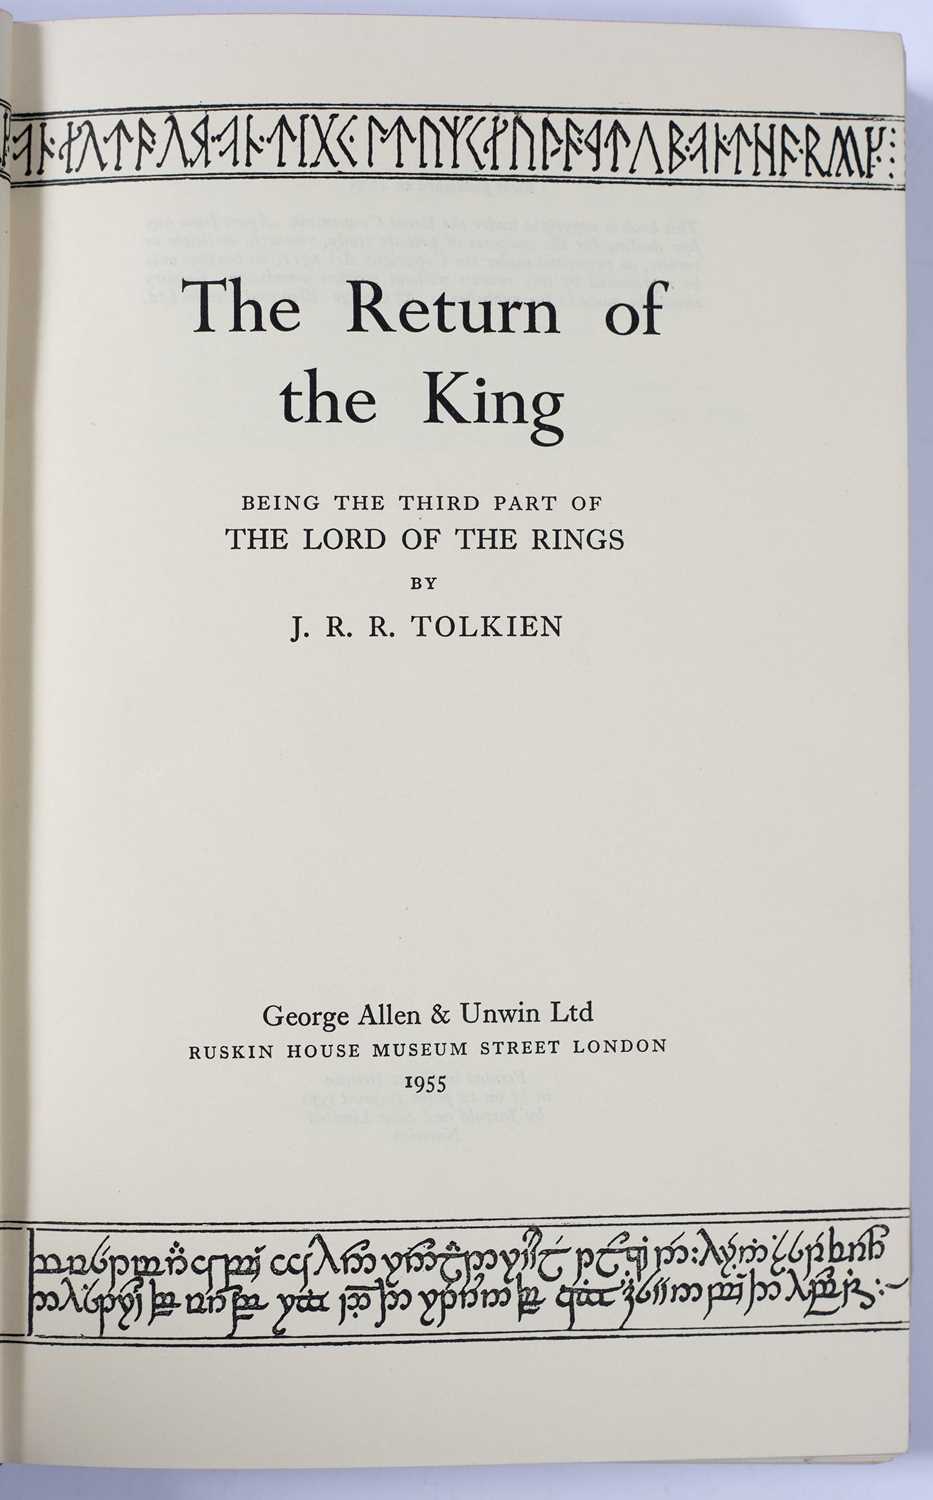 Tolkien (J.R.R.) 'The Lord of the Rings 'Trilogy', 'The Fellowship of the Ring'. 2nd imp 1954, ' - Image 4 of 16